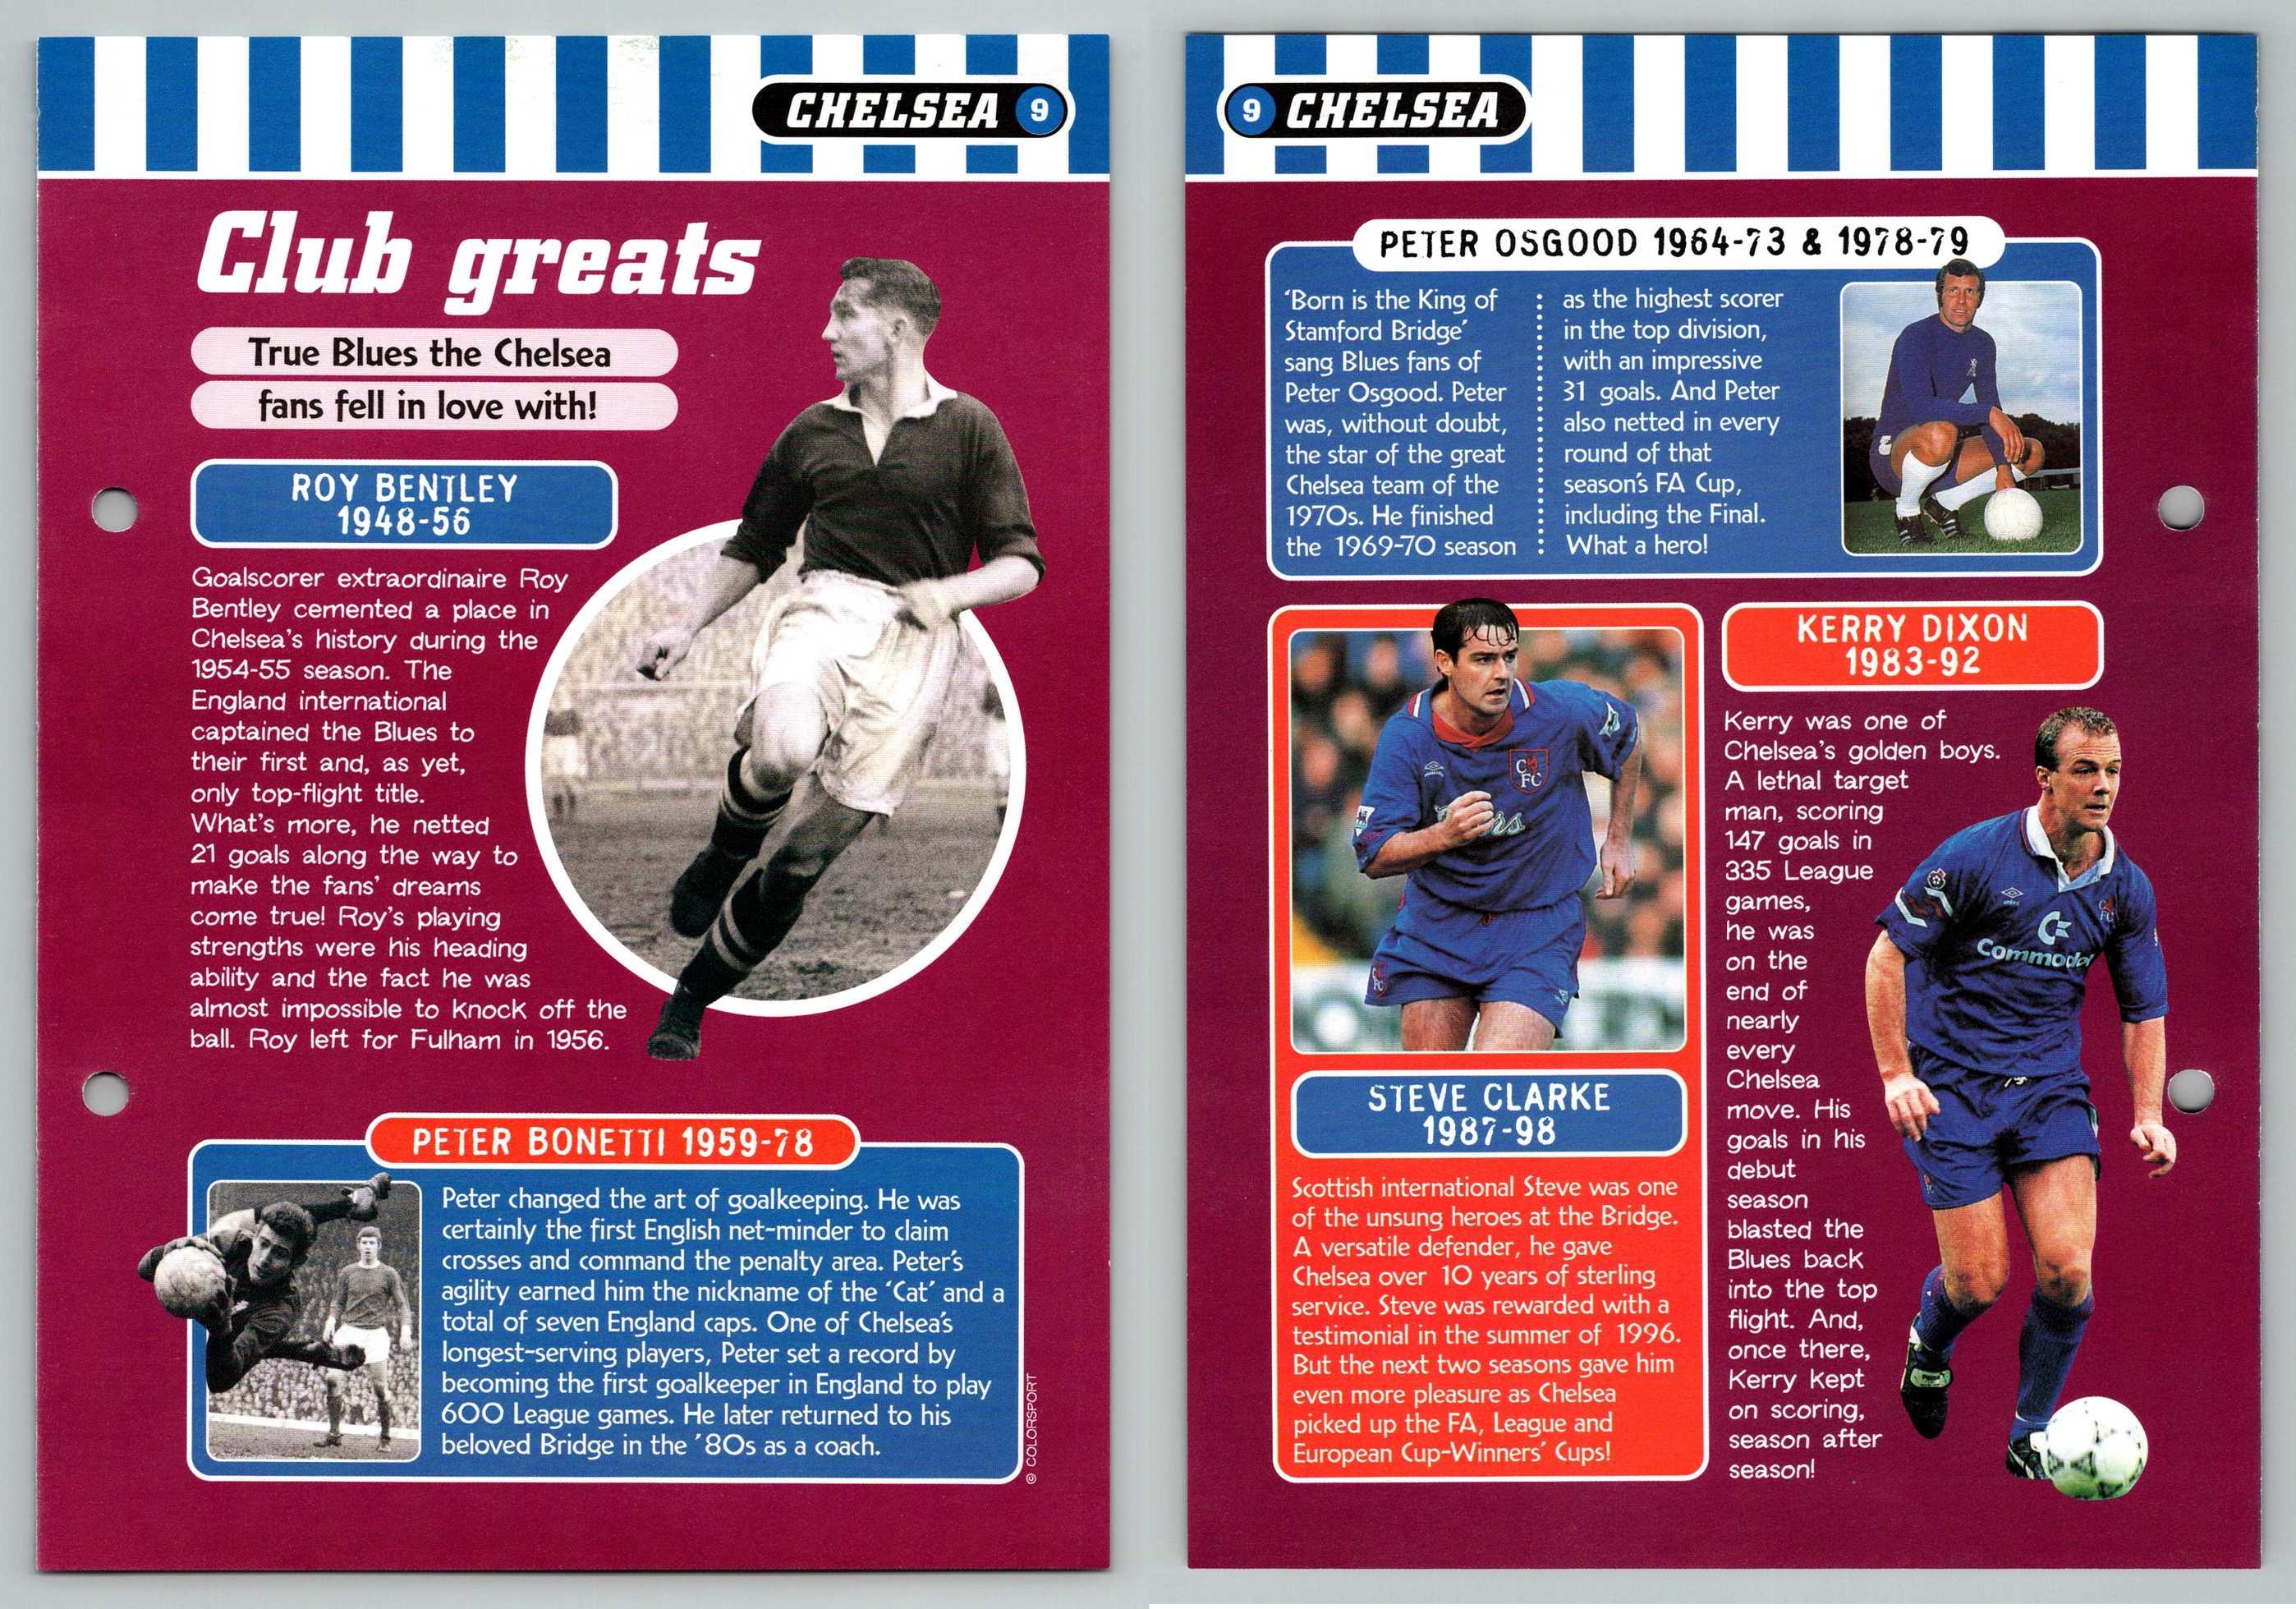 Club Greats - Chelsea #9 Football Magic 1998-9 Fact File Page